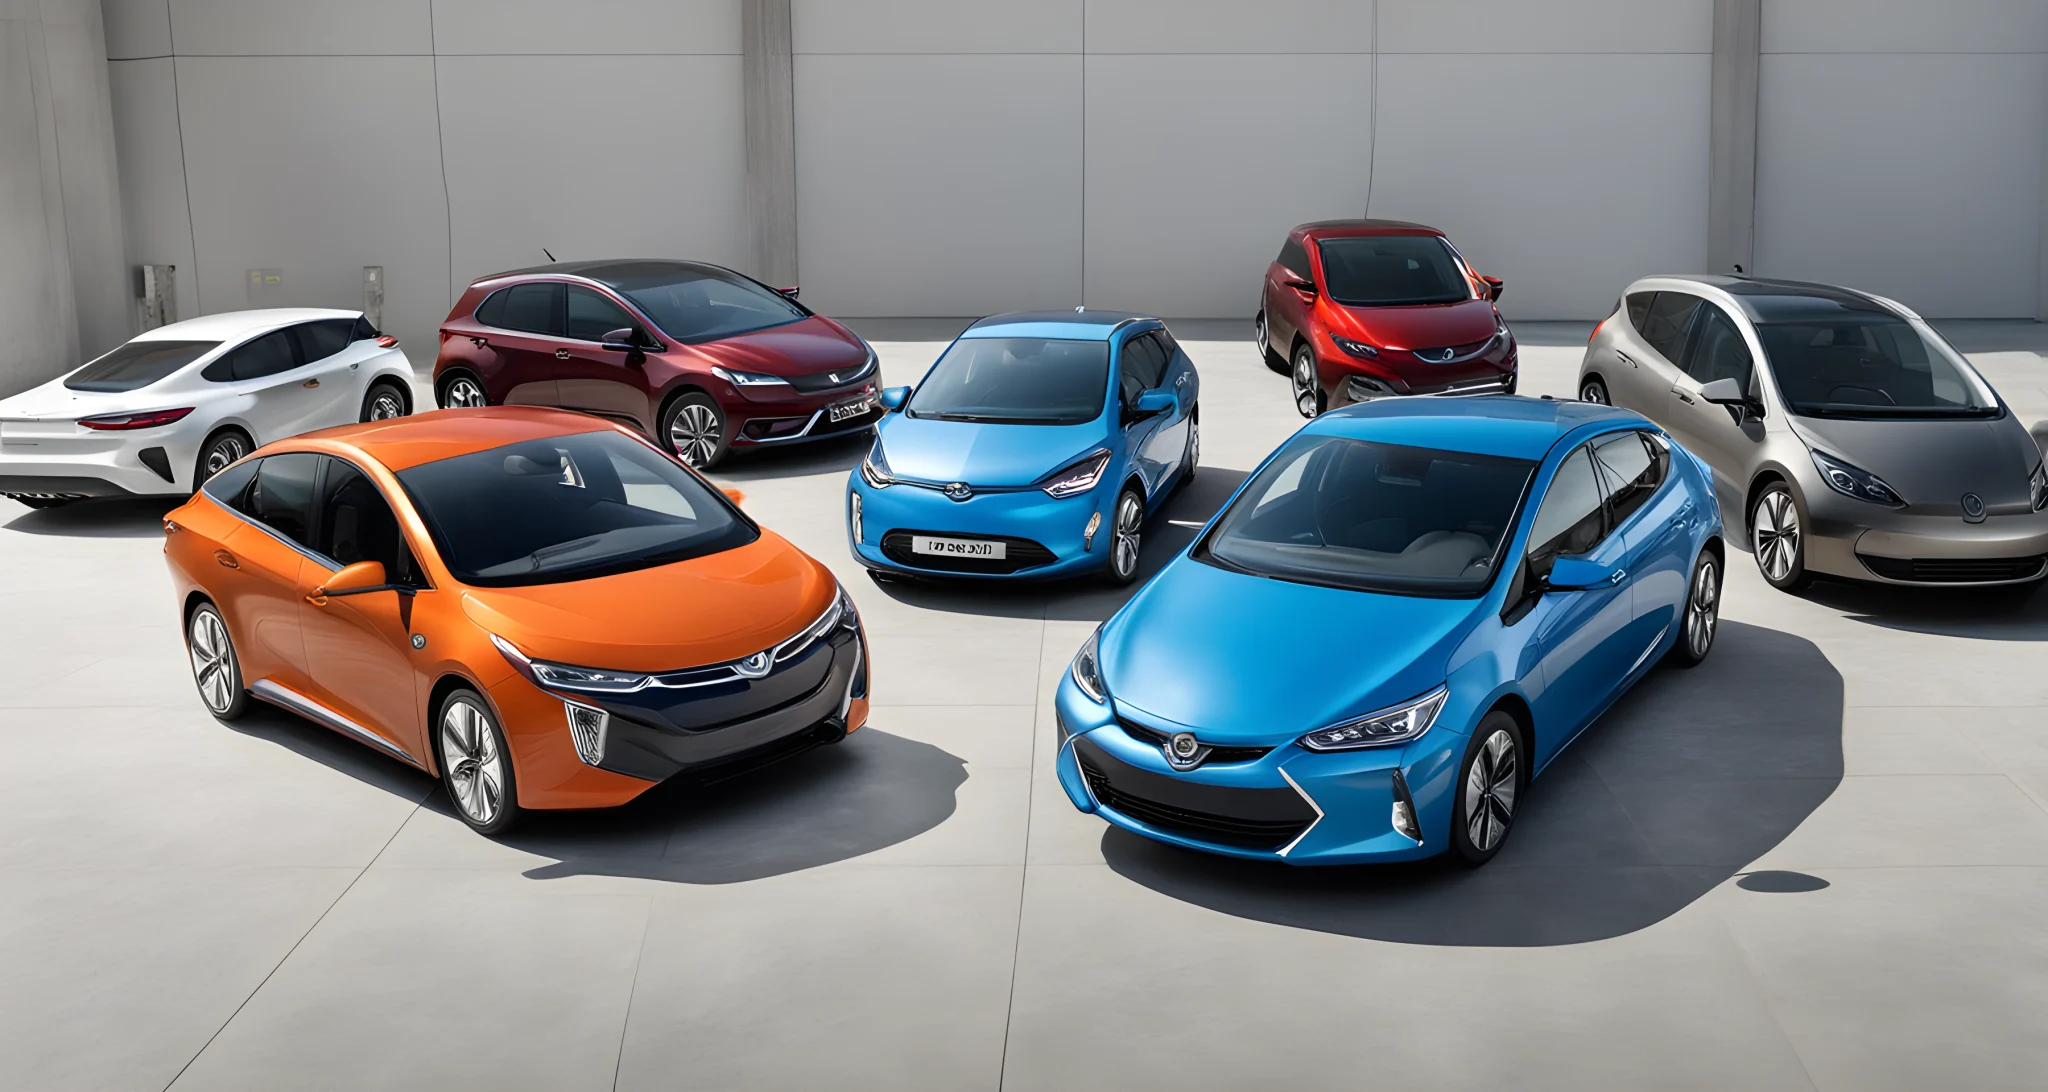 The image shows a lineup of the latest hybrid vehicles from various car manufacturers, including electric and gas-powered components.